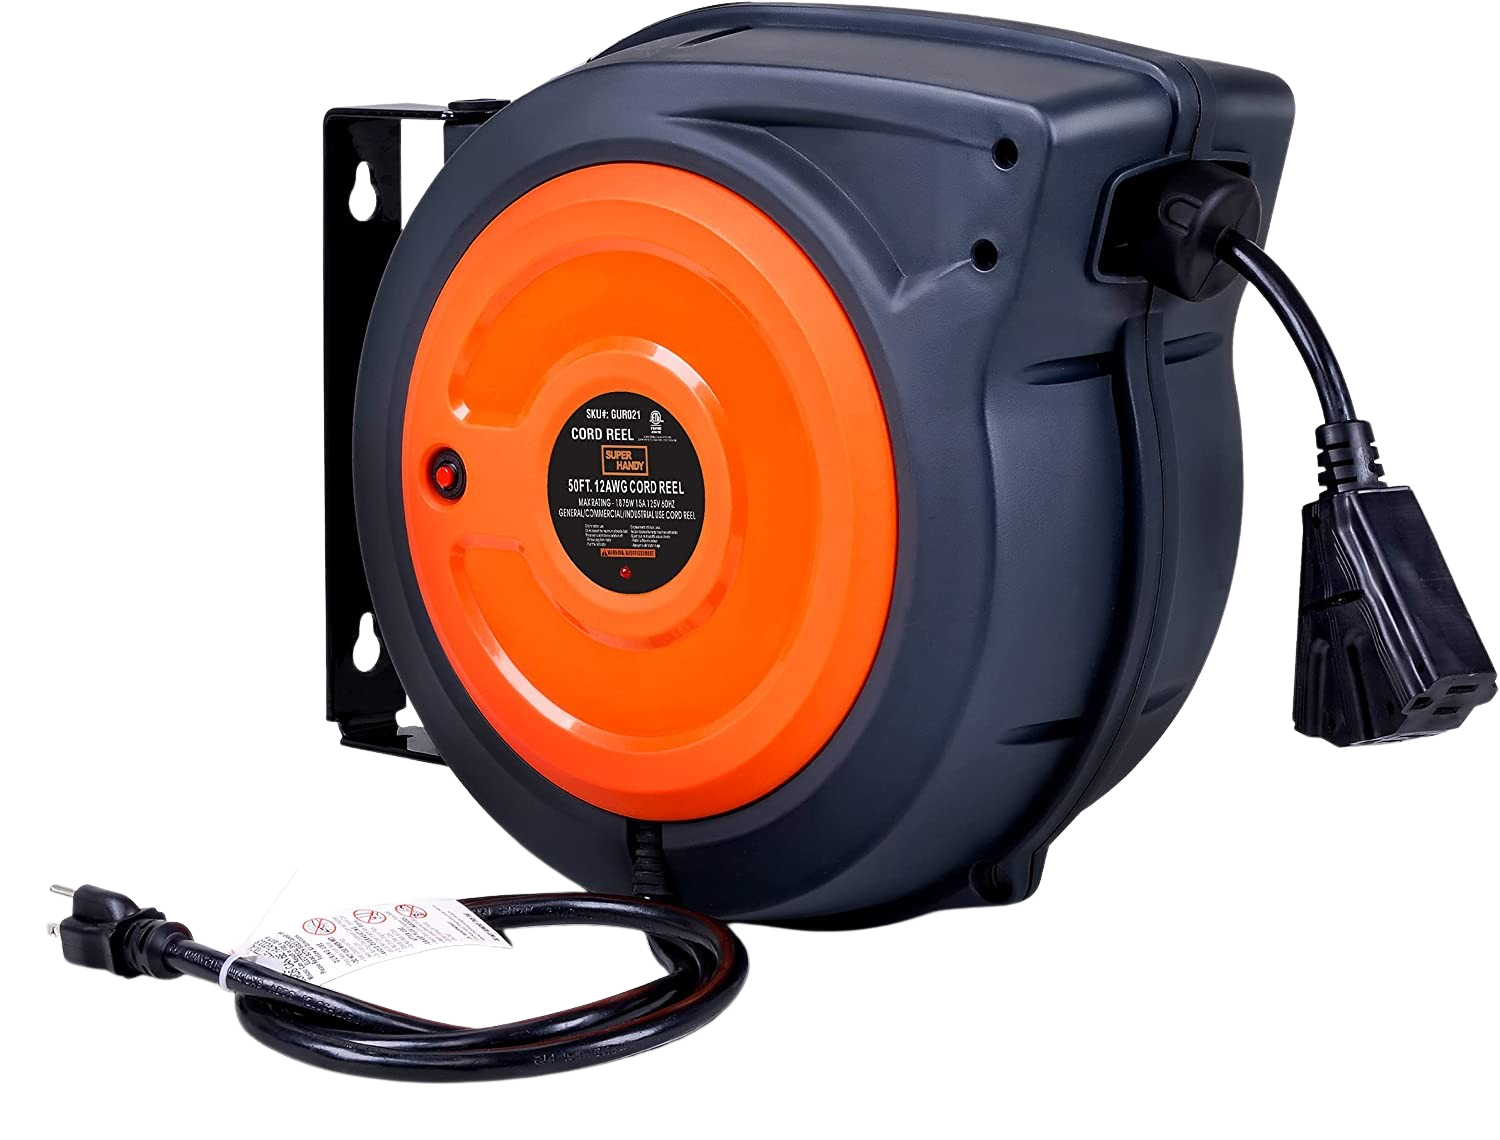 Super Handy, Super Handy GUR030 12AWG x 65' 15A 3 Grounded Outlets Mountable Retractable Extension Cord Reel New